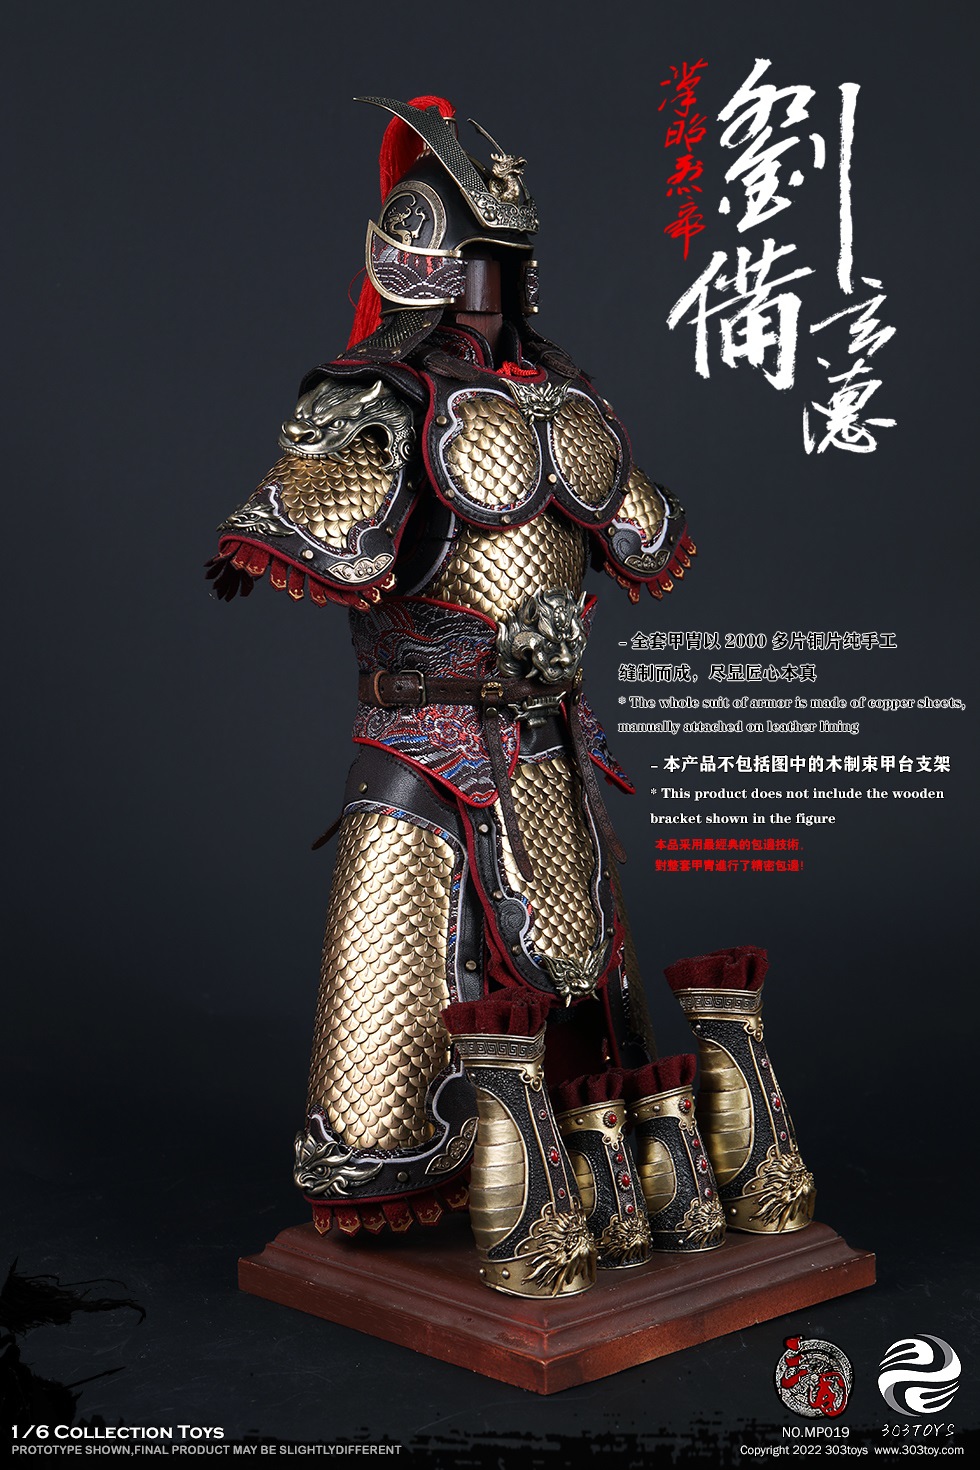 historical - NEW PRODUCT: 303Toys: 1/6 Three Kingdoms Series-Liu Bei Xuande Pure Copper Standard Edition/Deluxe Edition, Lu Zhanma #MP018/MP019/MP020 22484711